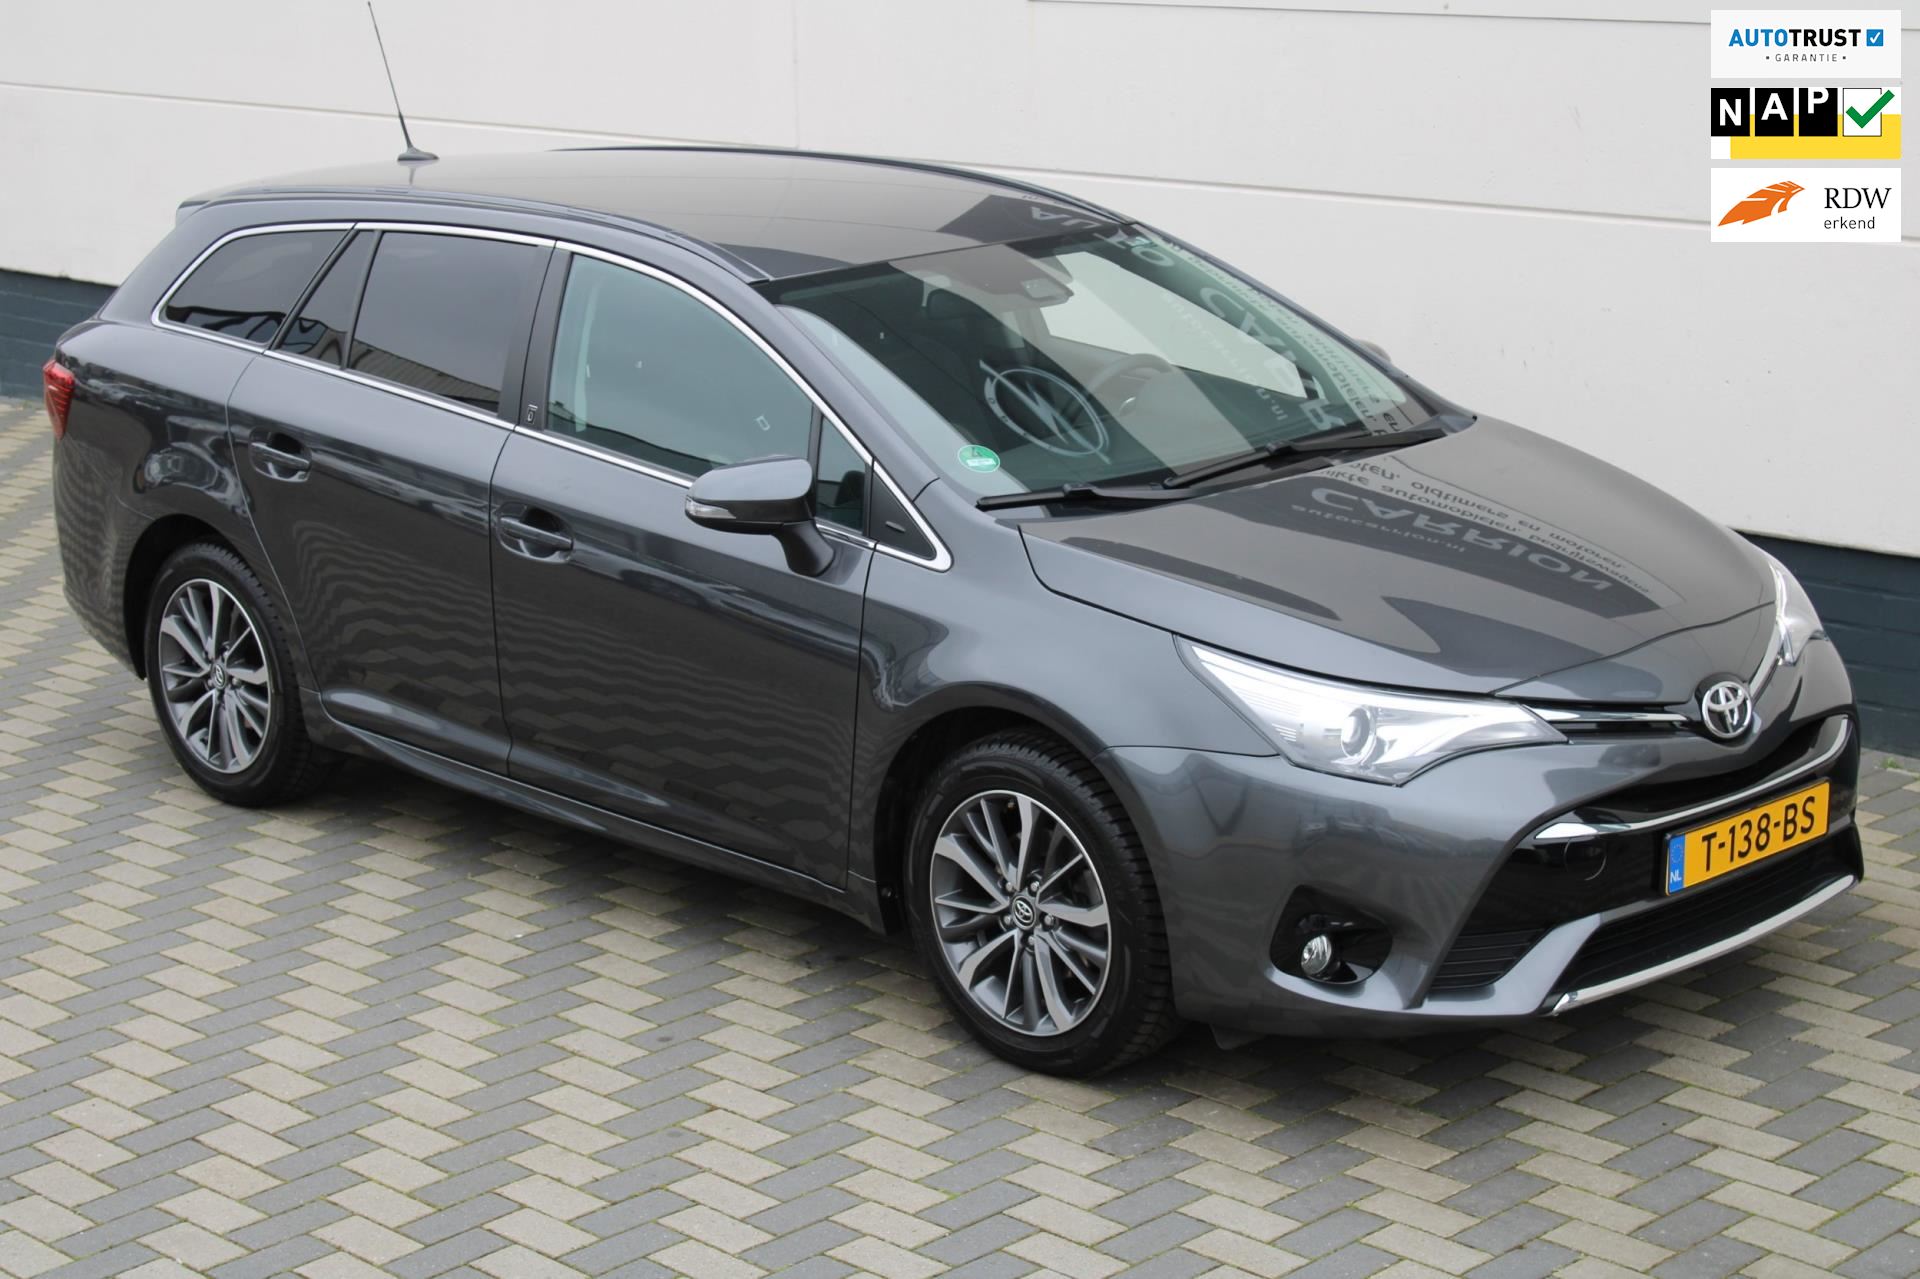 Toyota Avensis Touring Sports occasion - CARRION